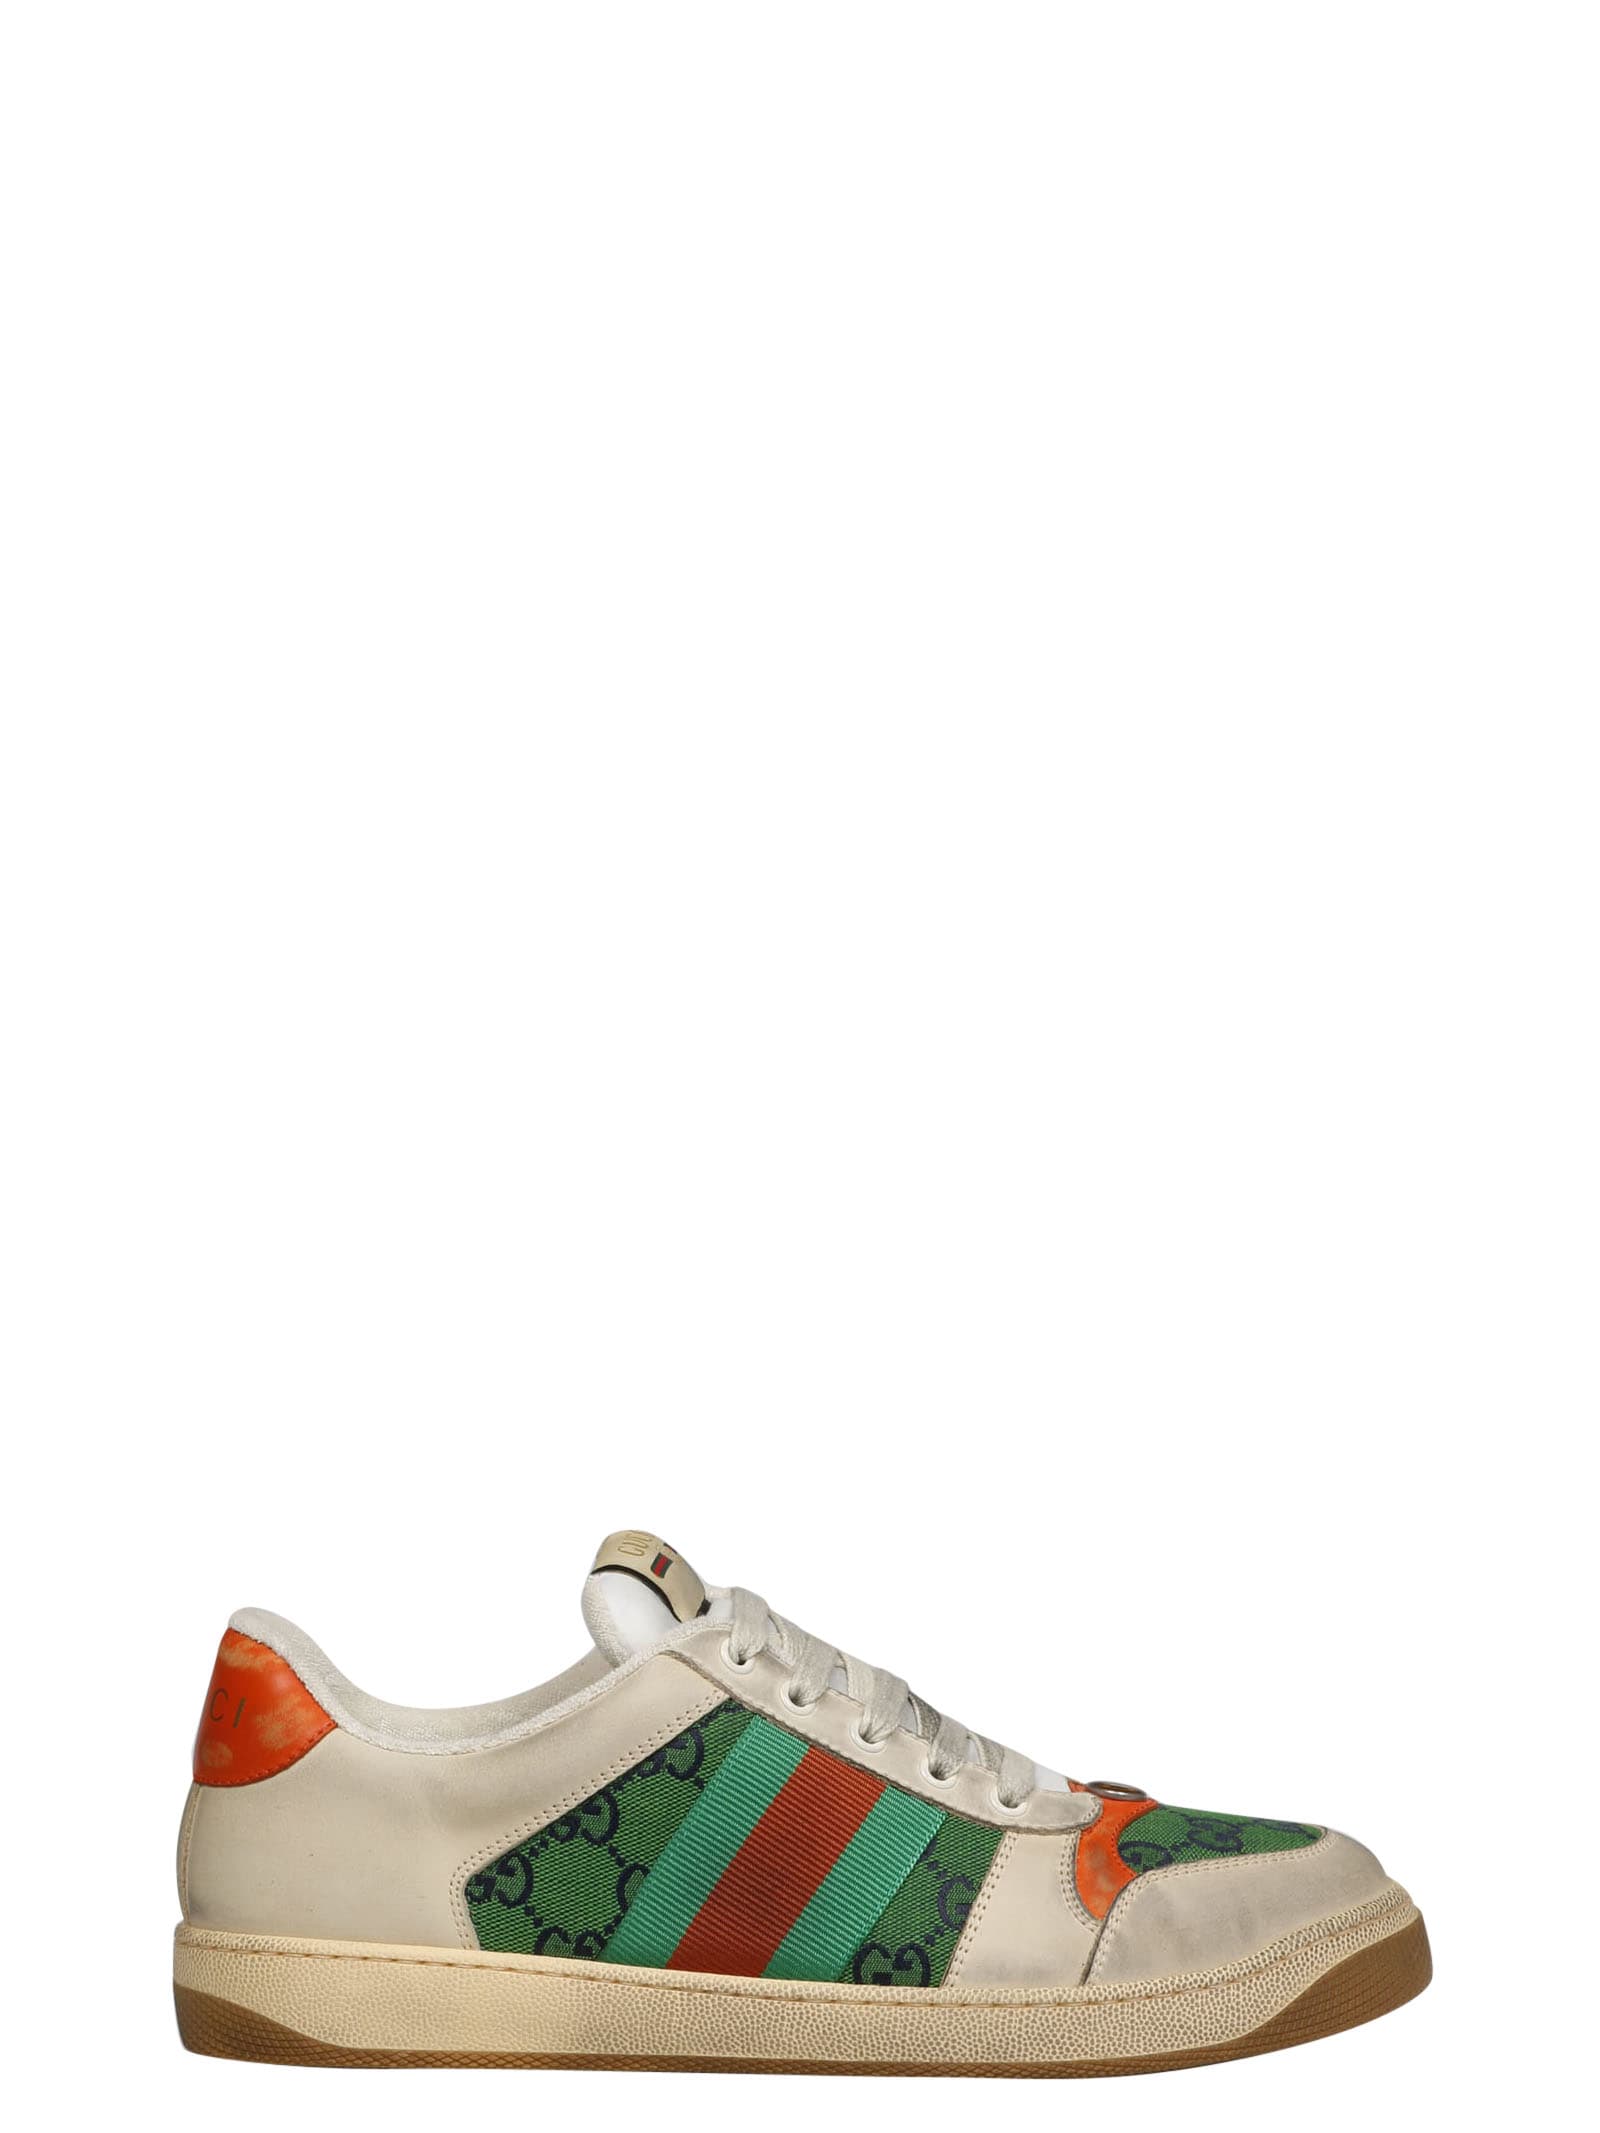 century 21 gucci sneakers